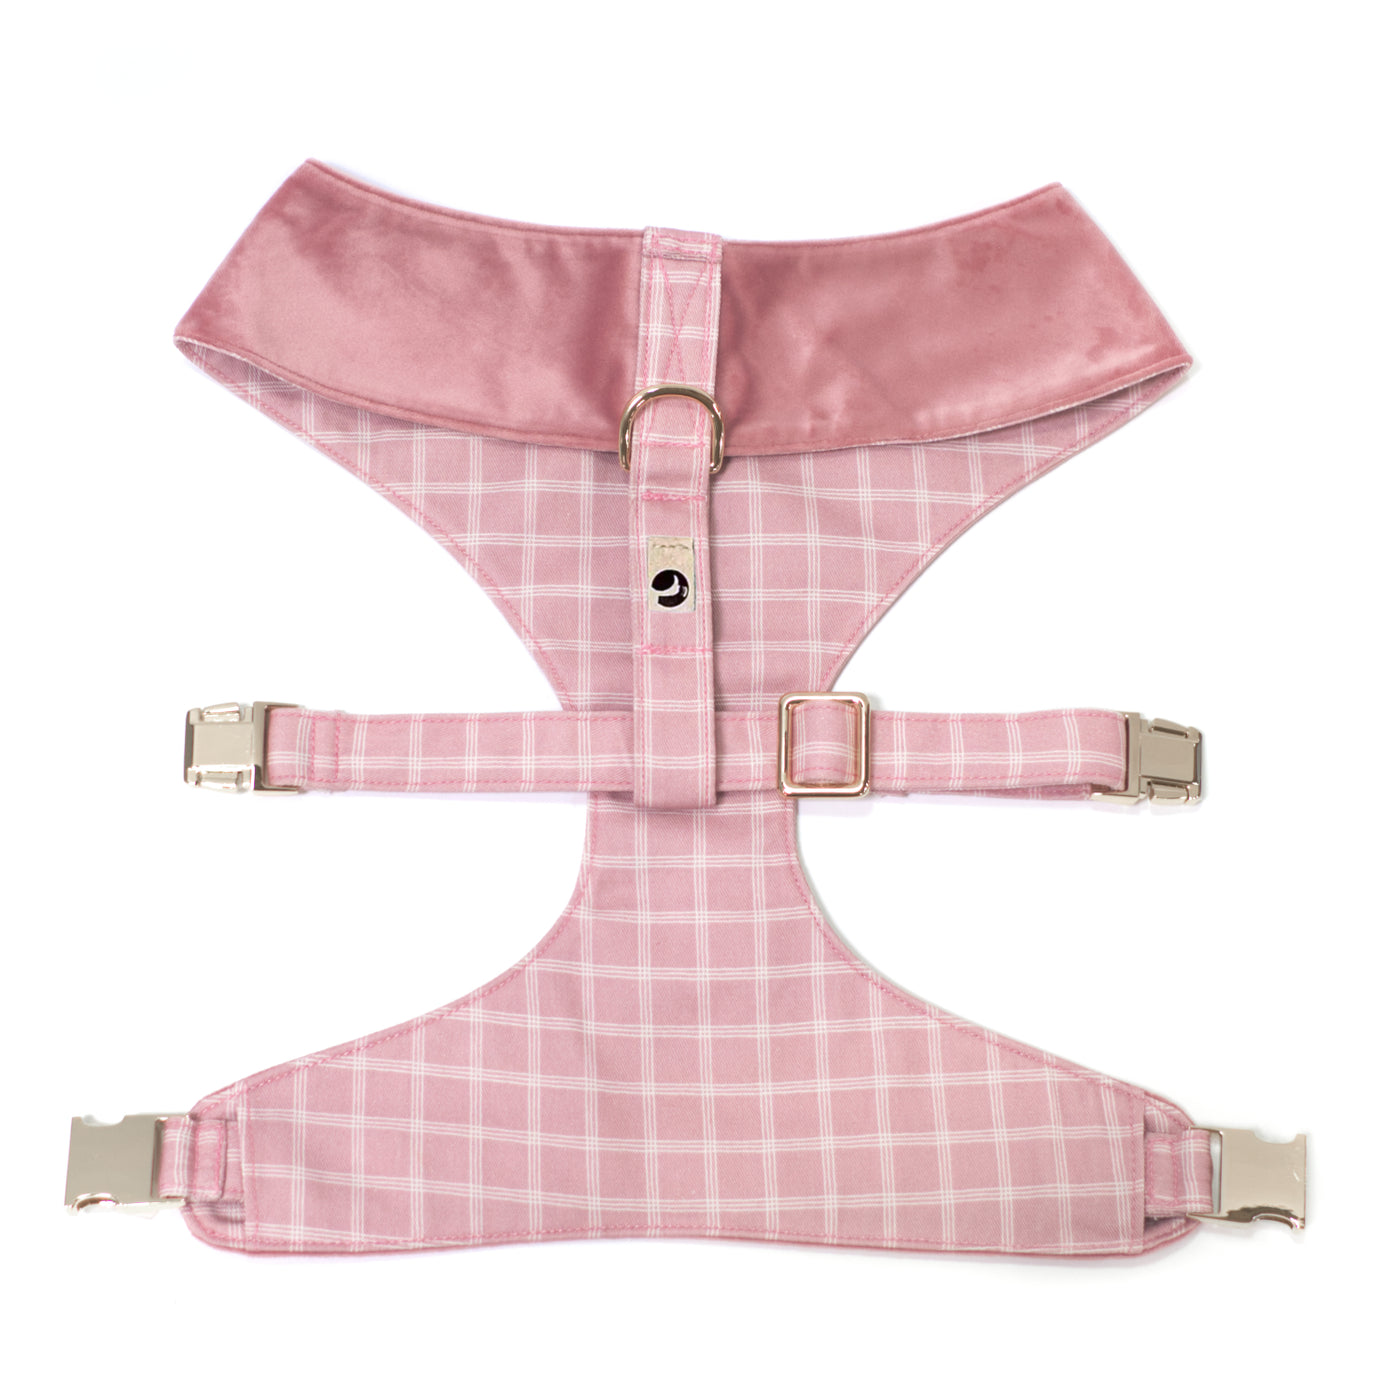 Pink velvet and plaid reversible dog harness with gold buckles shown from top/back